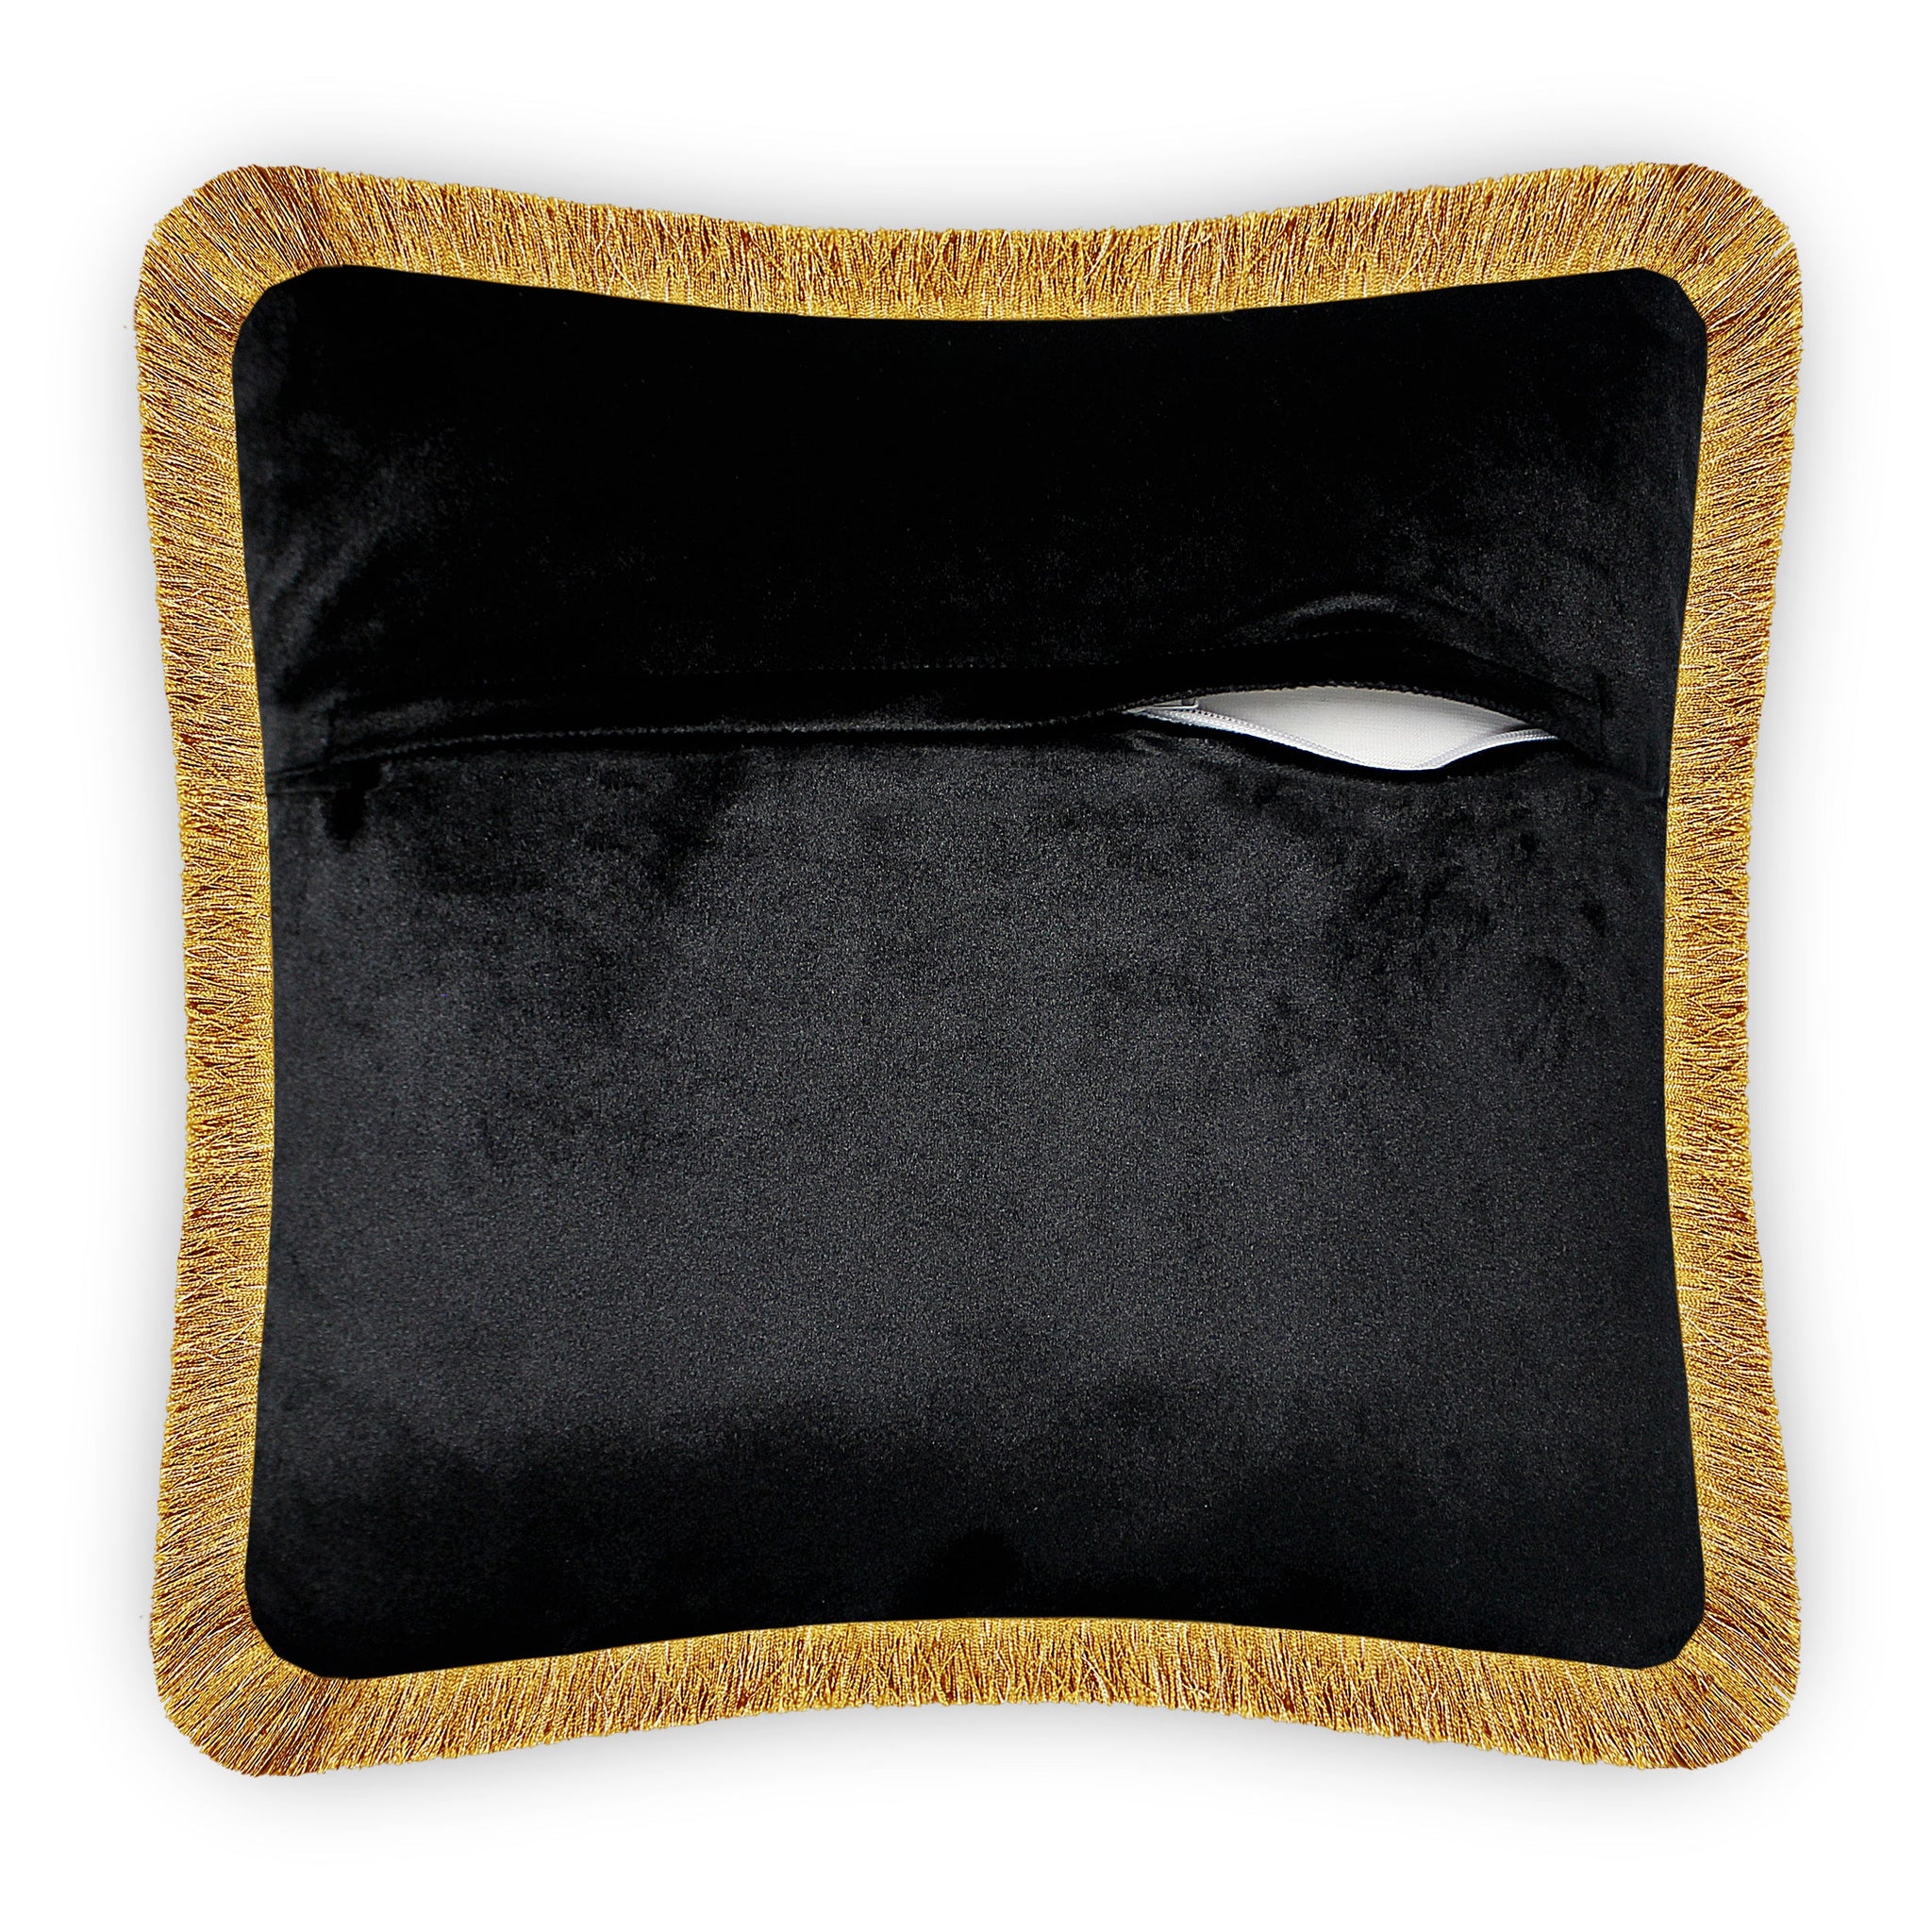 Black Velvet Cushion Cover Embroidery Imitated Geometric Decorative Pillow Cover Modern Home Decor Throw Pillow for Sofa Chair Bedroom 45x45 cm 18x18 In